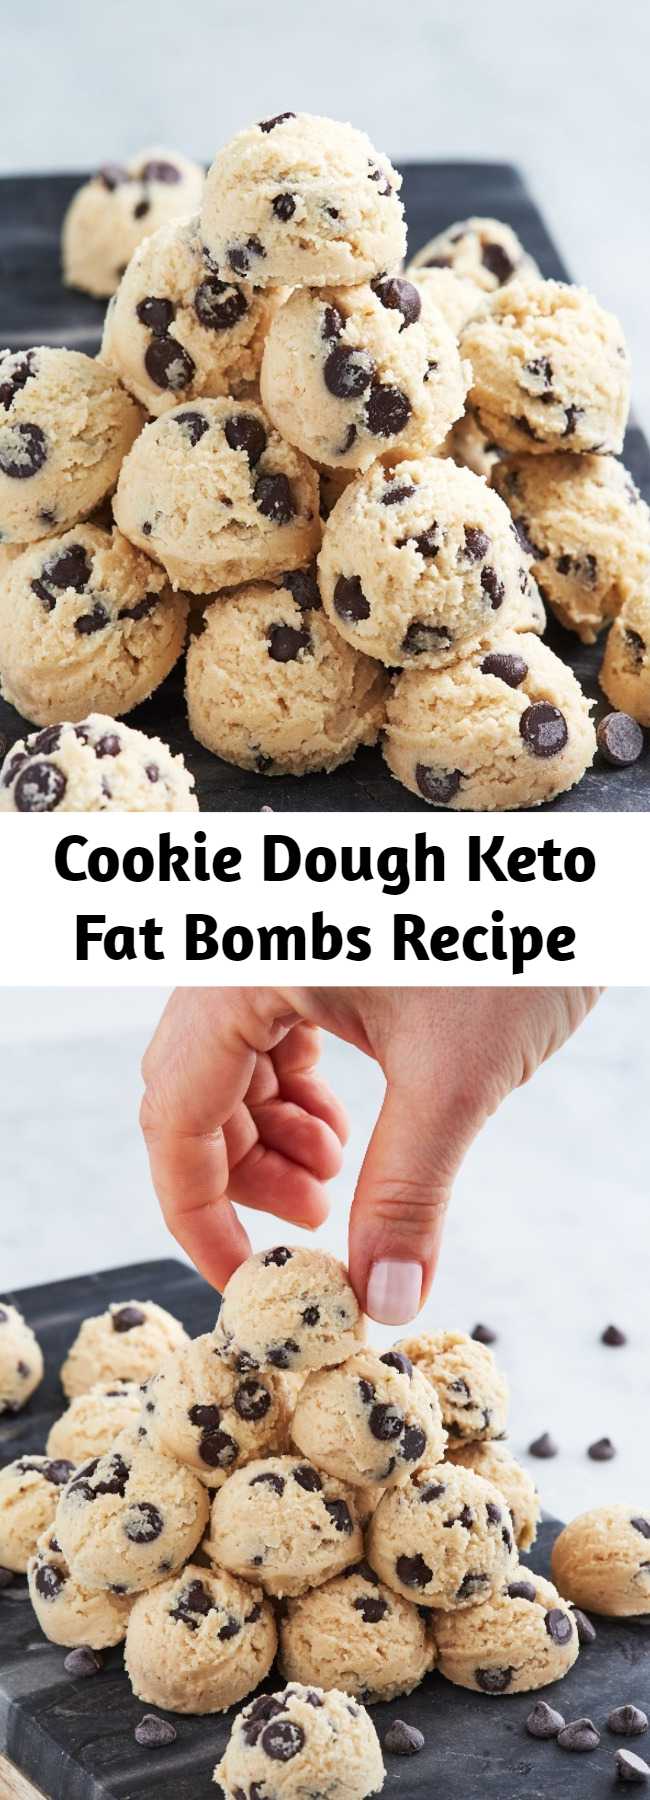 Cookie Dough Keto Fat Bombs Recipe - We brings you a recipe for a dessert bite that won't through you off your keto cycle. These are the keto-friendly way to eat cookie dough right out of the package. #ketorecipes #fatbombs #cookiedough #cookiedoughfatbombs #ketosnack #ketodessert #healthyrecipes #healthysnacks